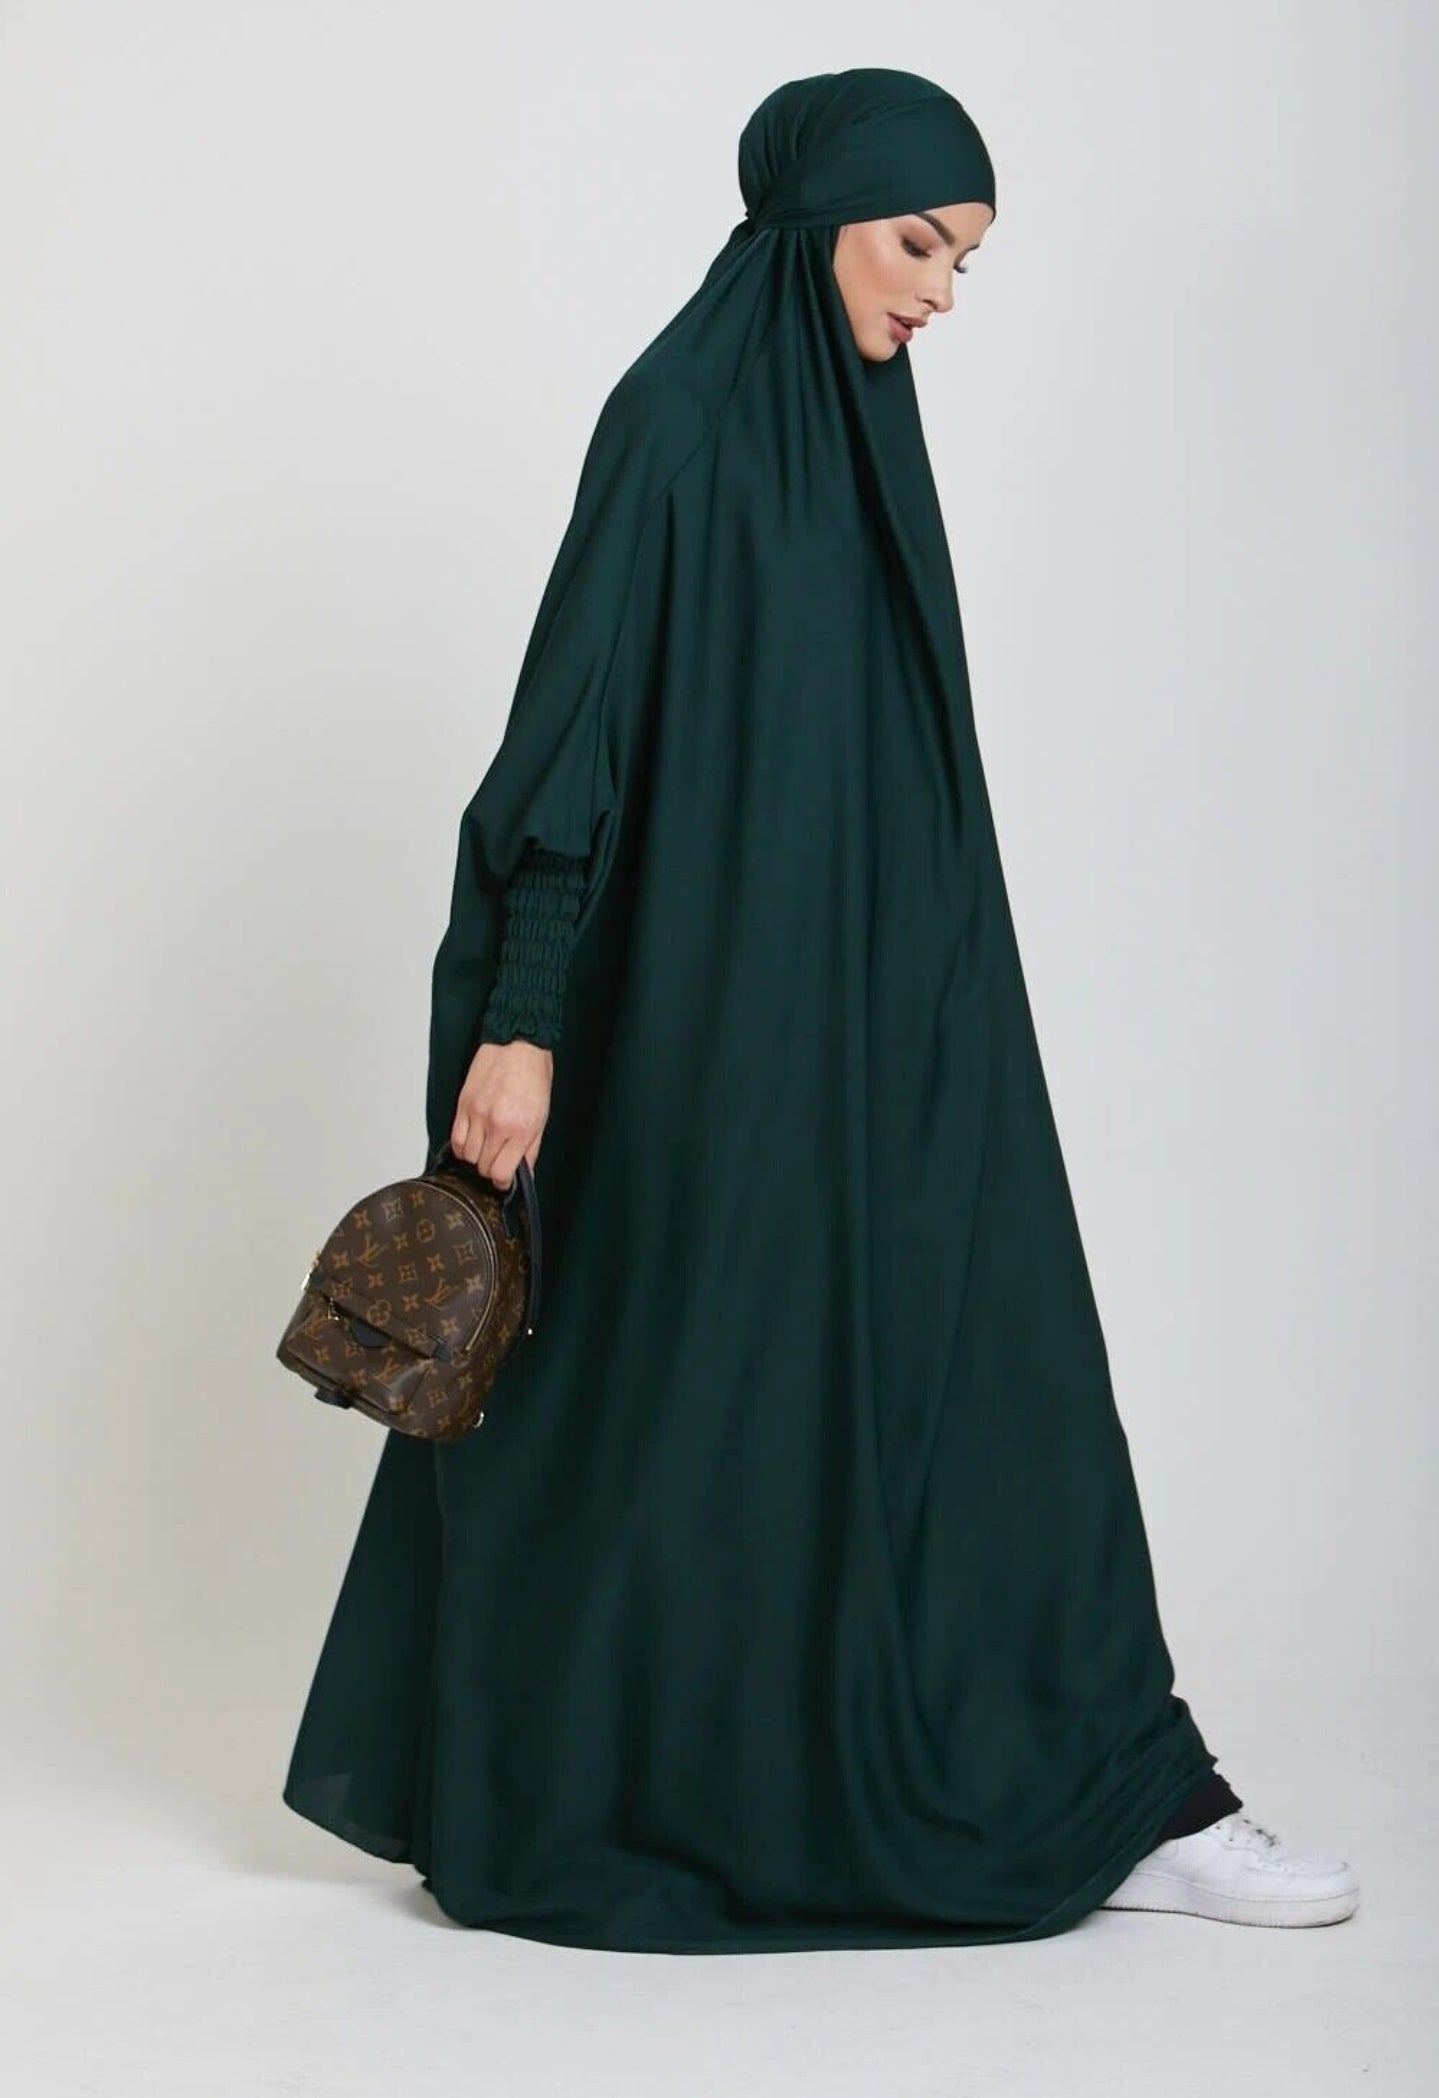 Adorn yourself in the lush beauty of our Emerald Green One Piece Tie-Up Jilbab. This exclusive Islamic garment seamlessly blends modesty with contemporary allure, offering a captivating fusion of grace and comfort for your sacred moments of devotion.